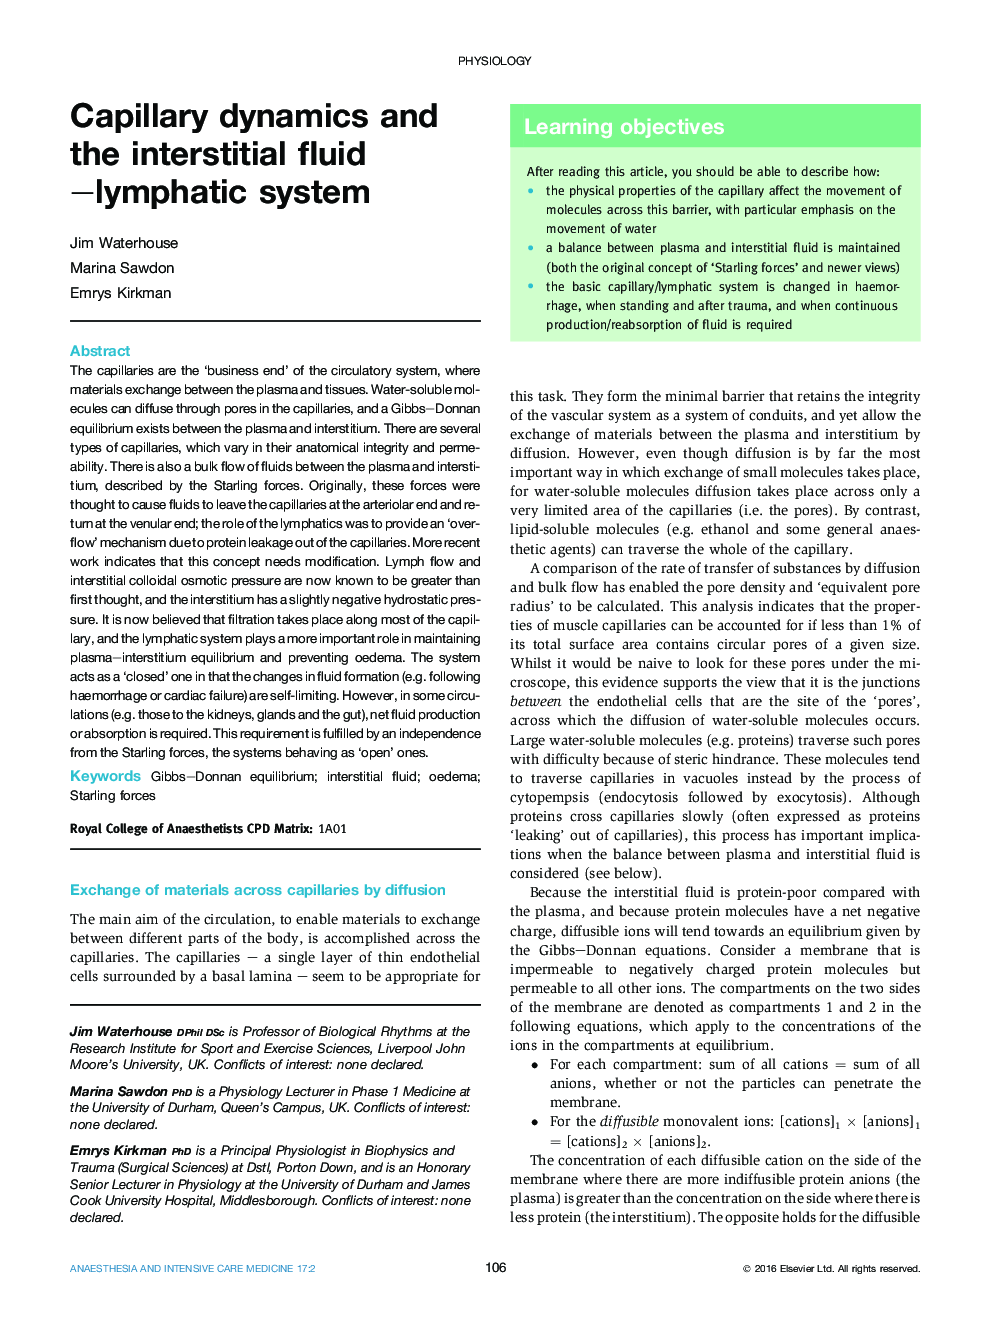 Capillary dynamics and the interstitial fluid–lymphatic system